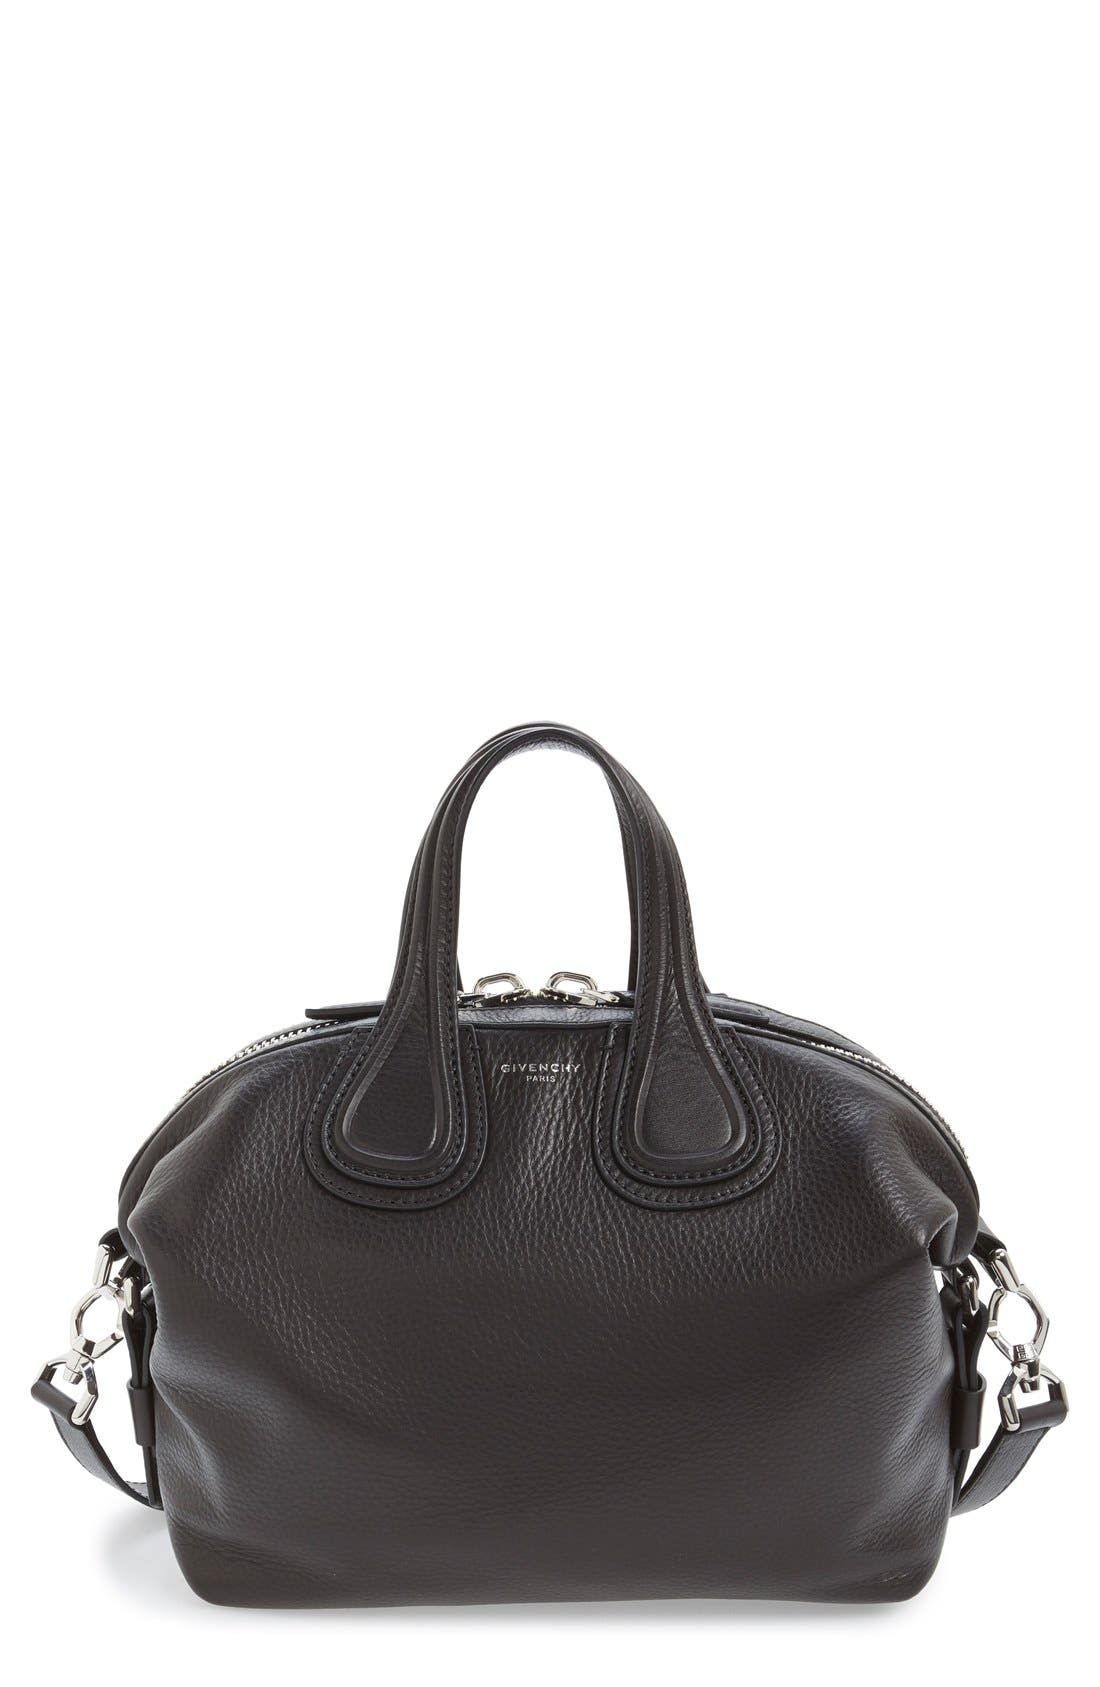 Givenchy 'Small Nightingale' Leather 